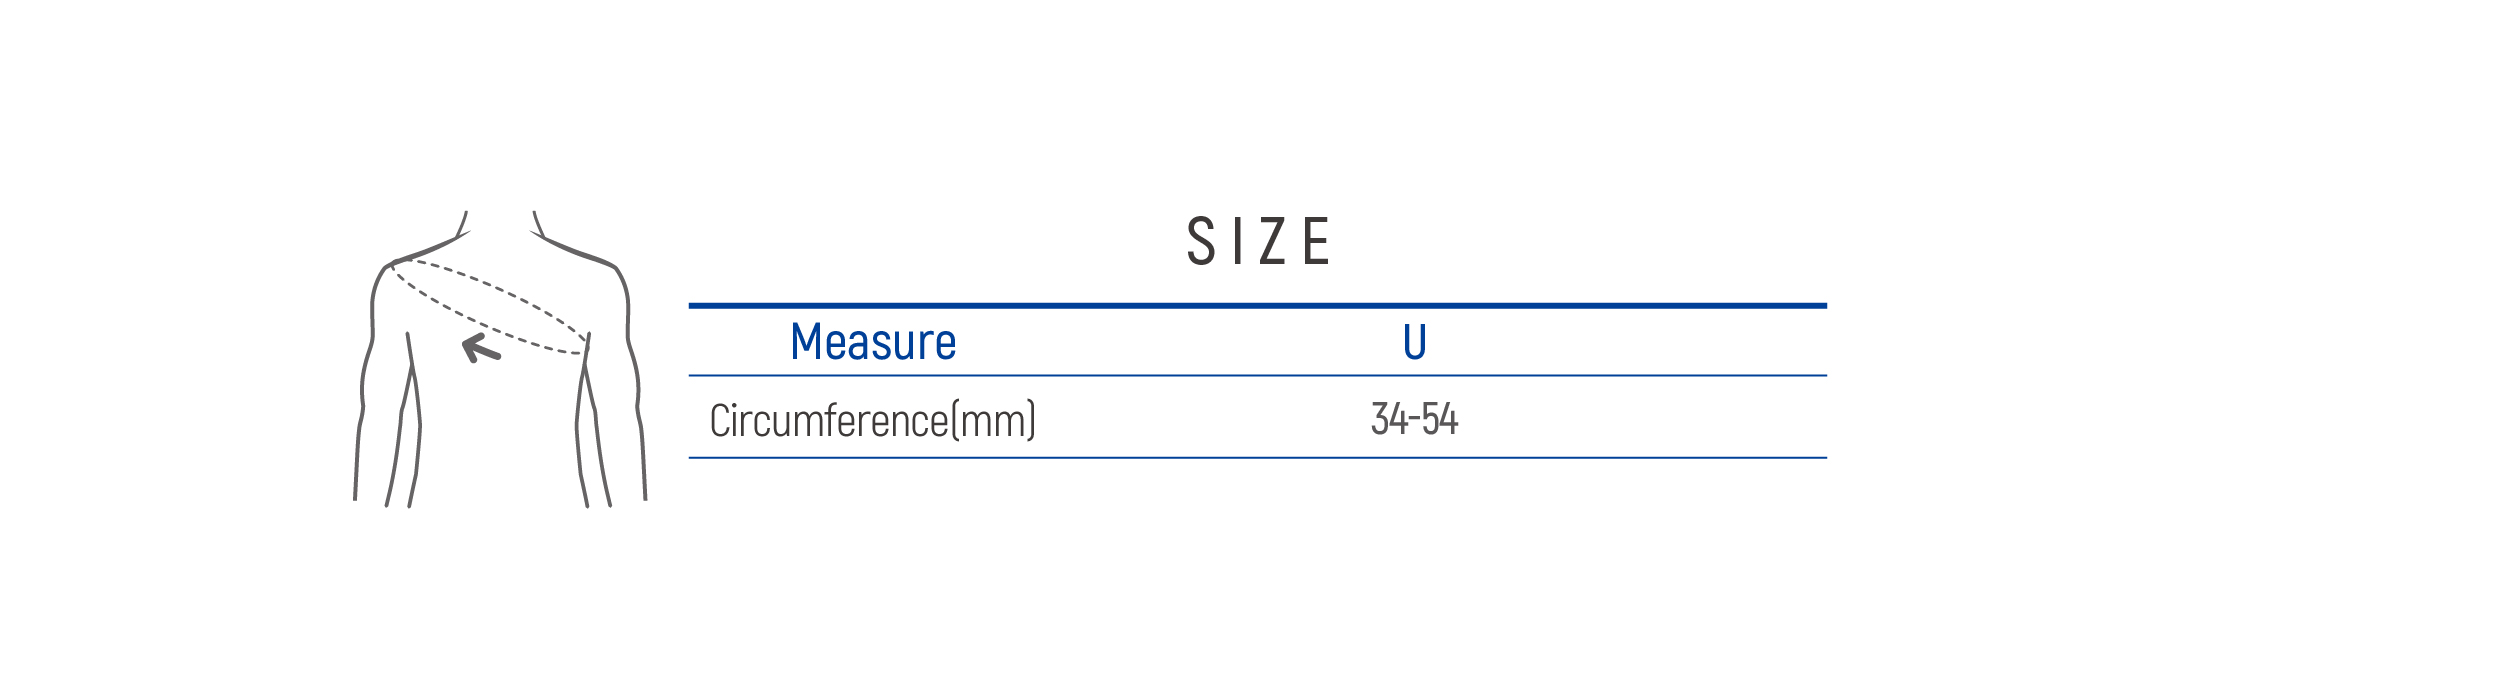 DR-906 Size table image